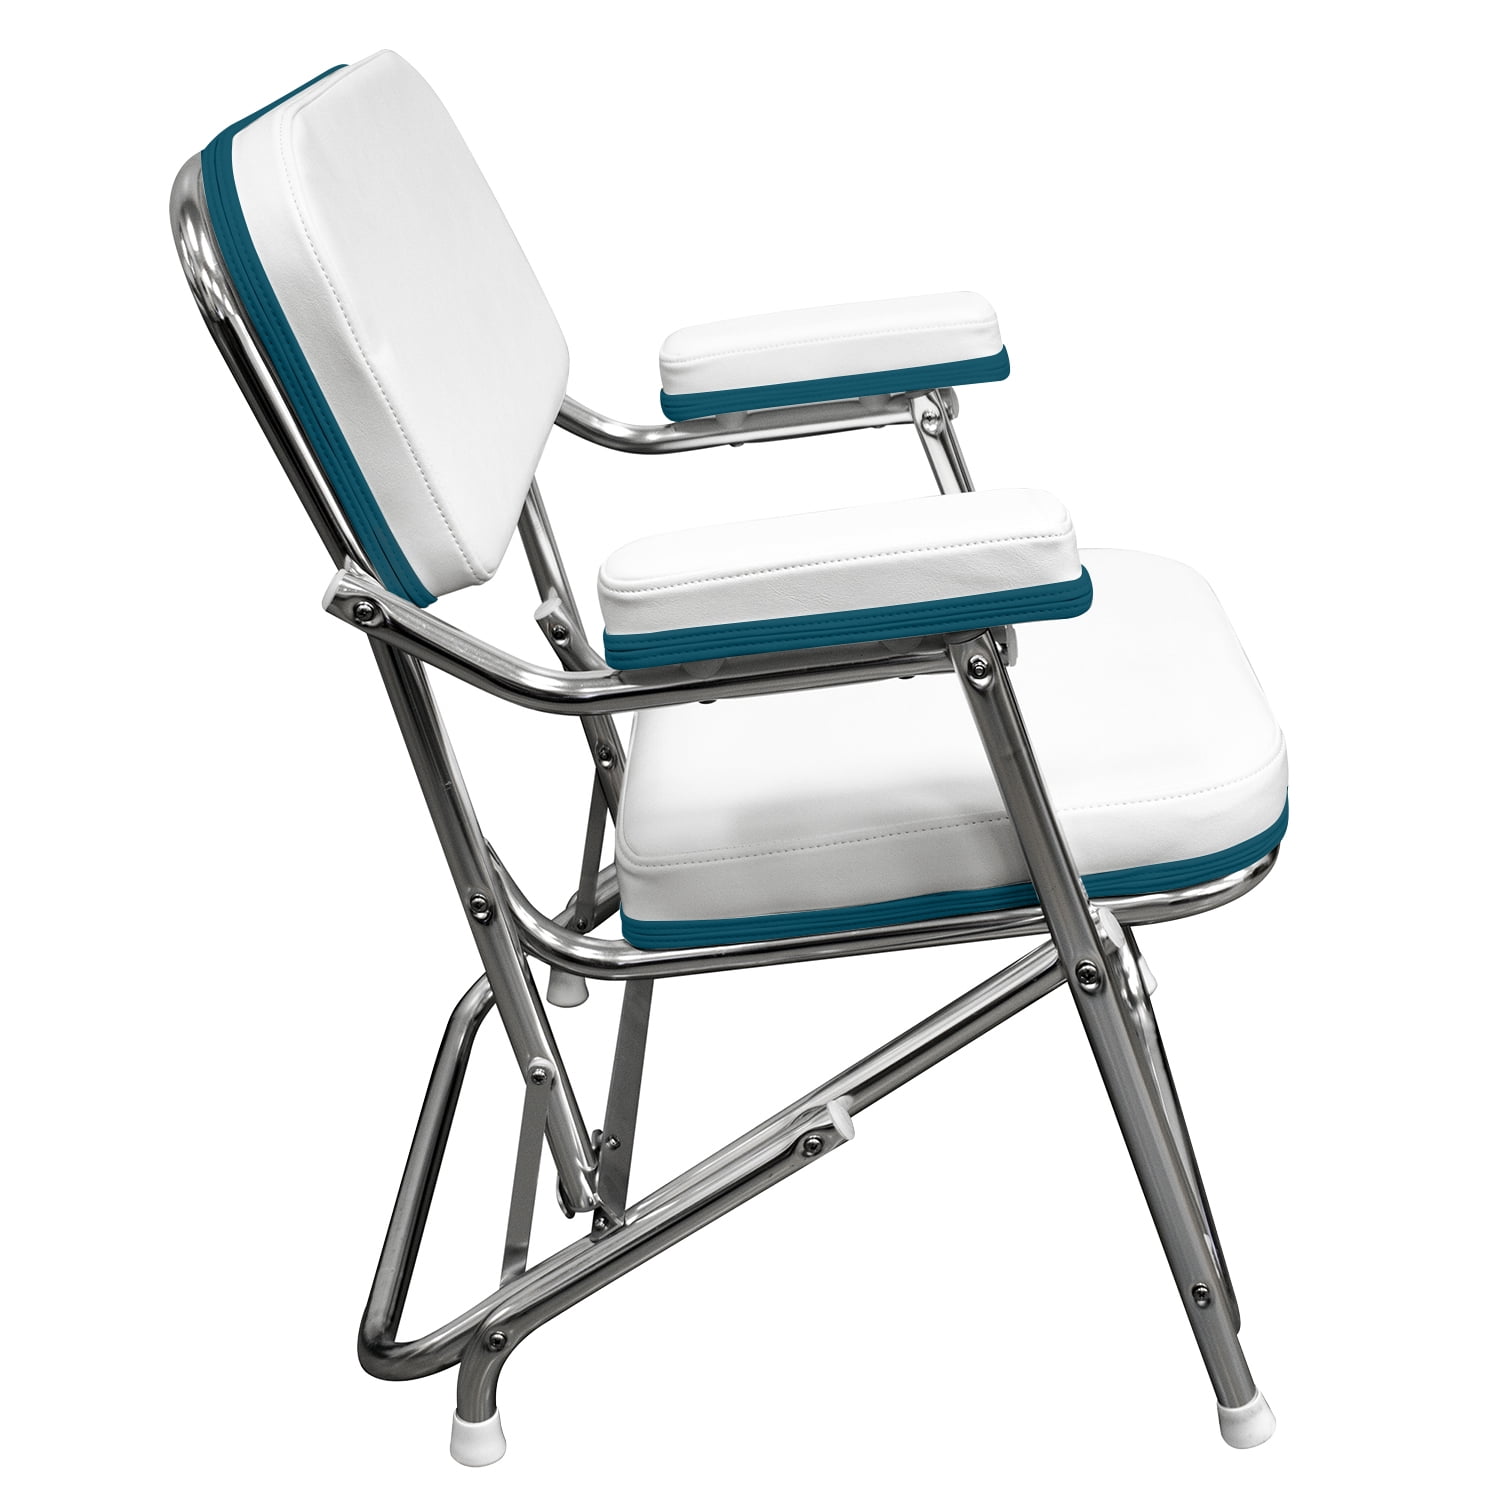 Wise 3319-924 Boaters Value Promotional Folding Deck Chair, White with Navy  Trim 